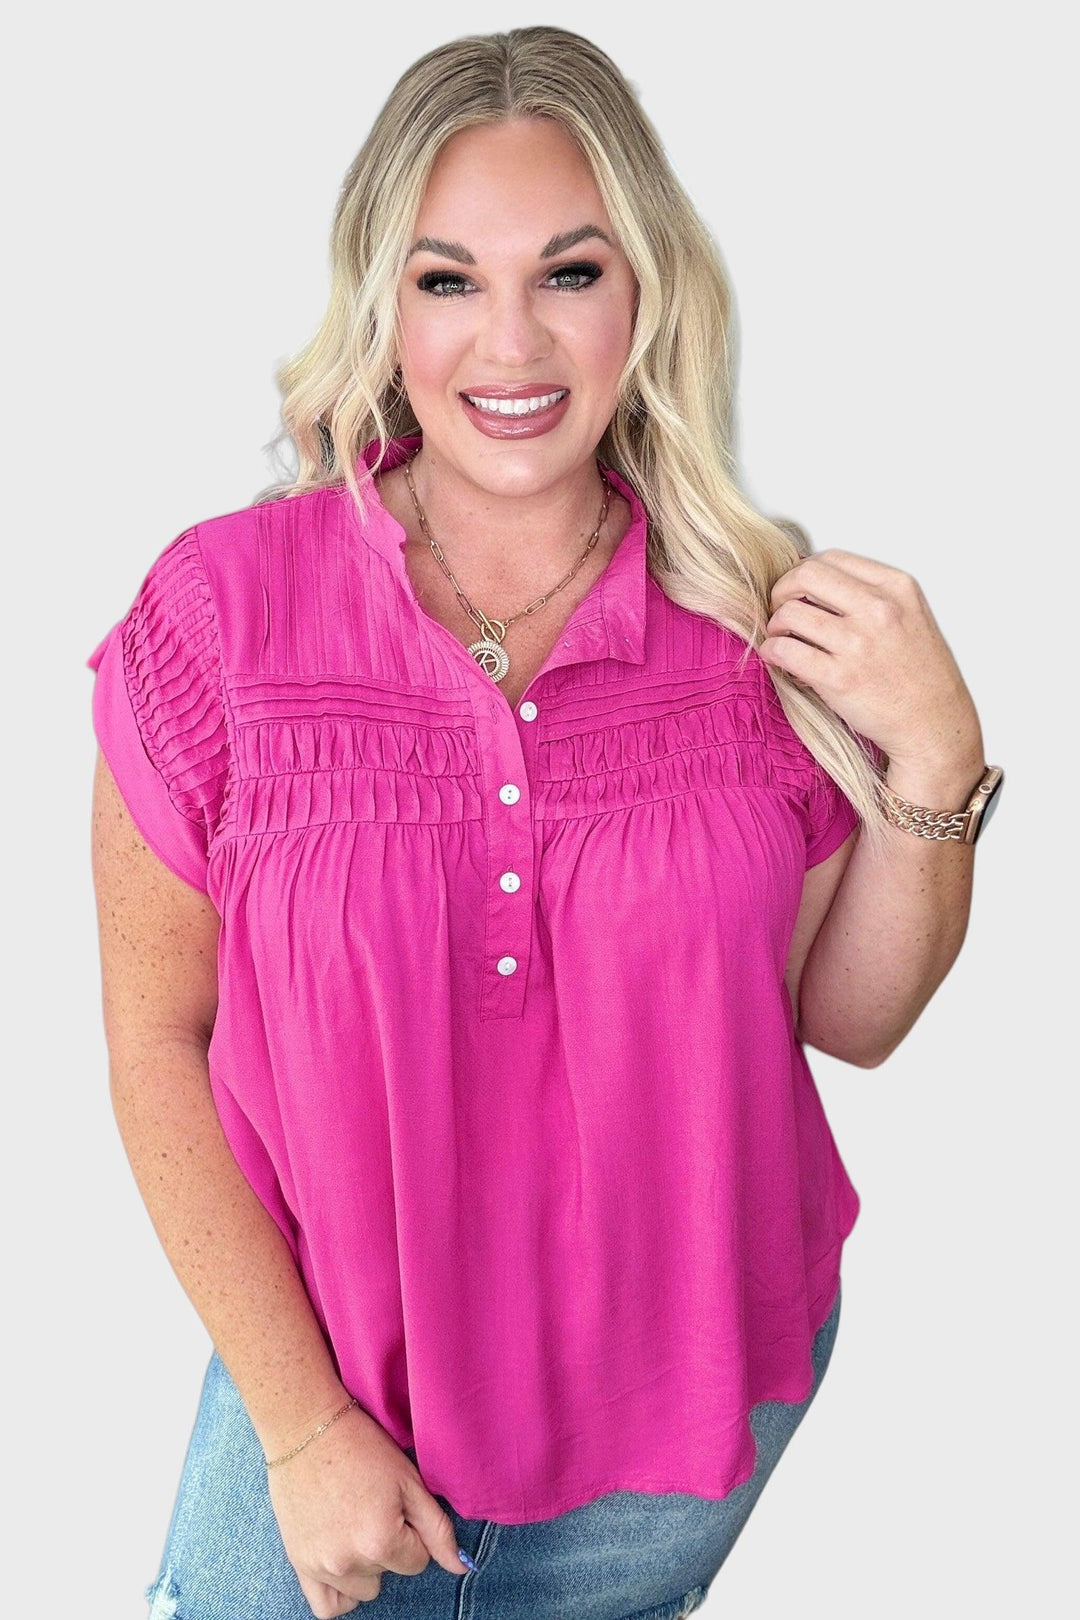 Pleat Detail Button Up Blouse in Hot Pink Shirts & Tops